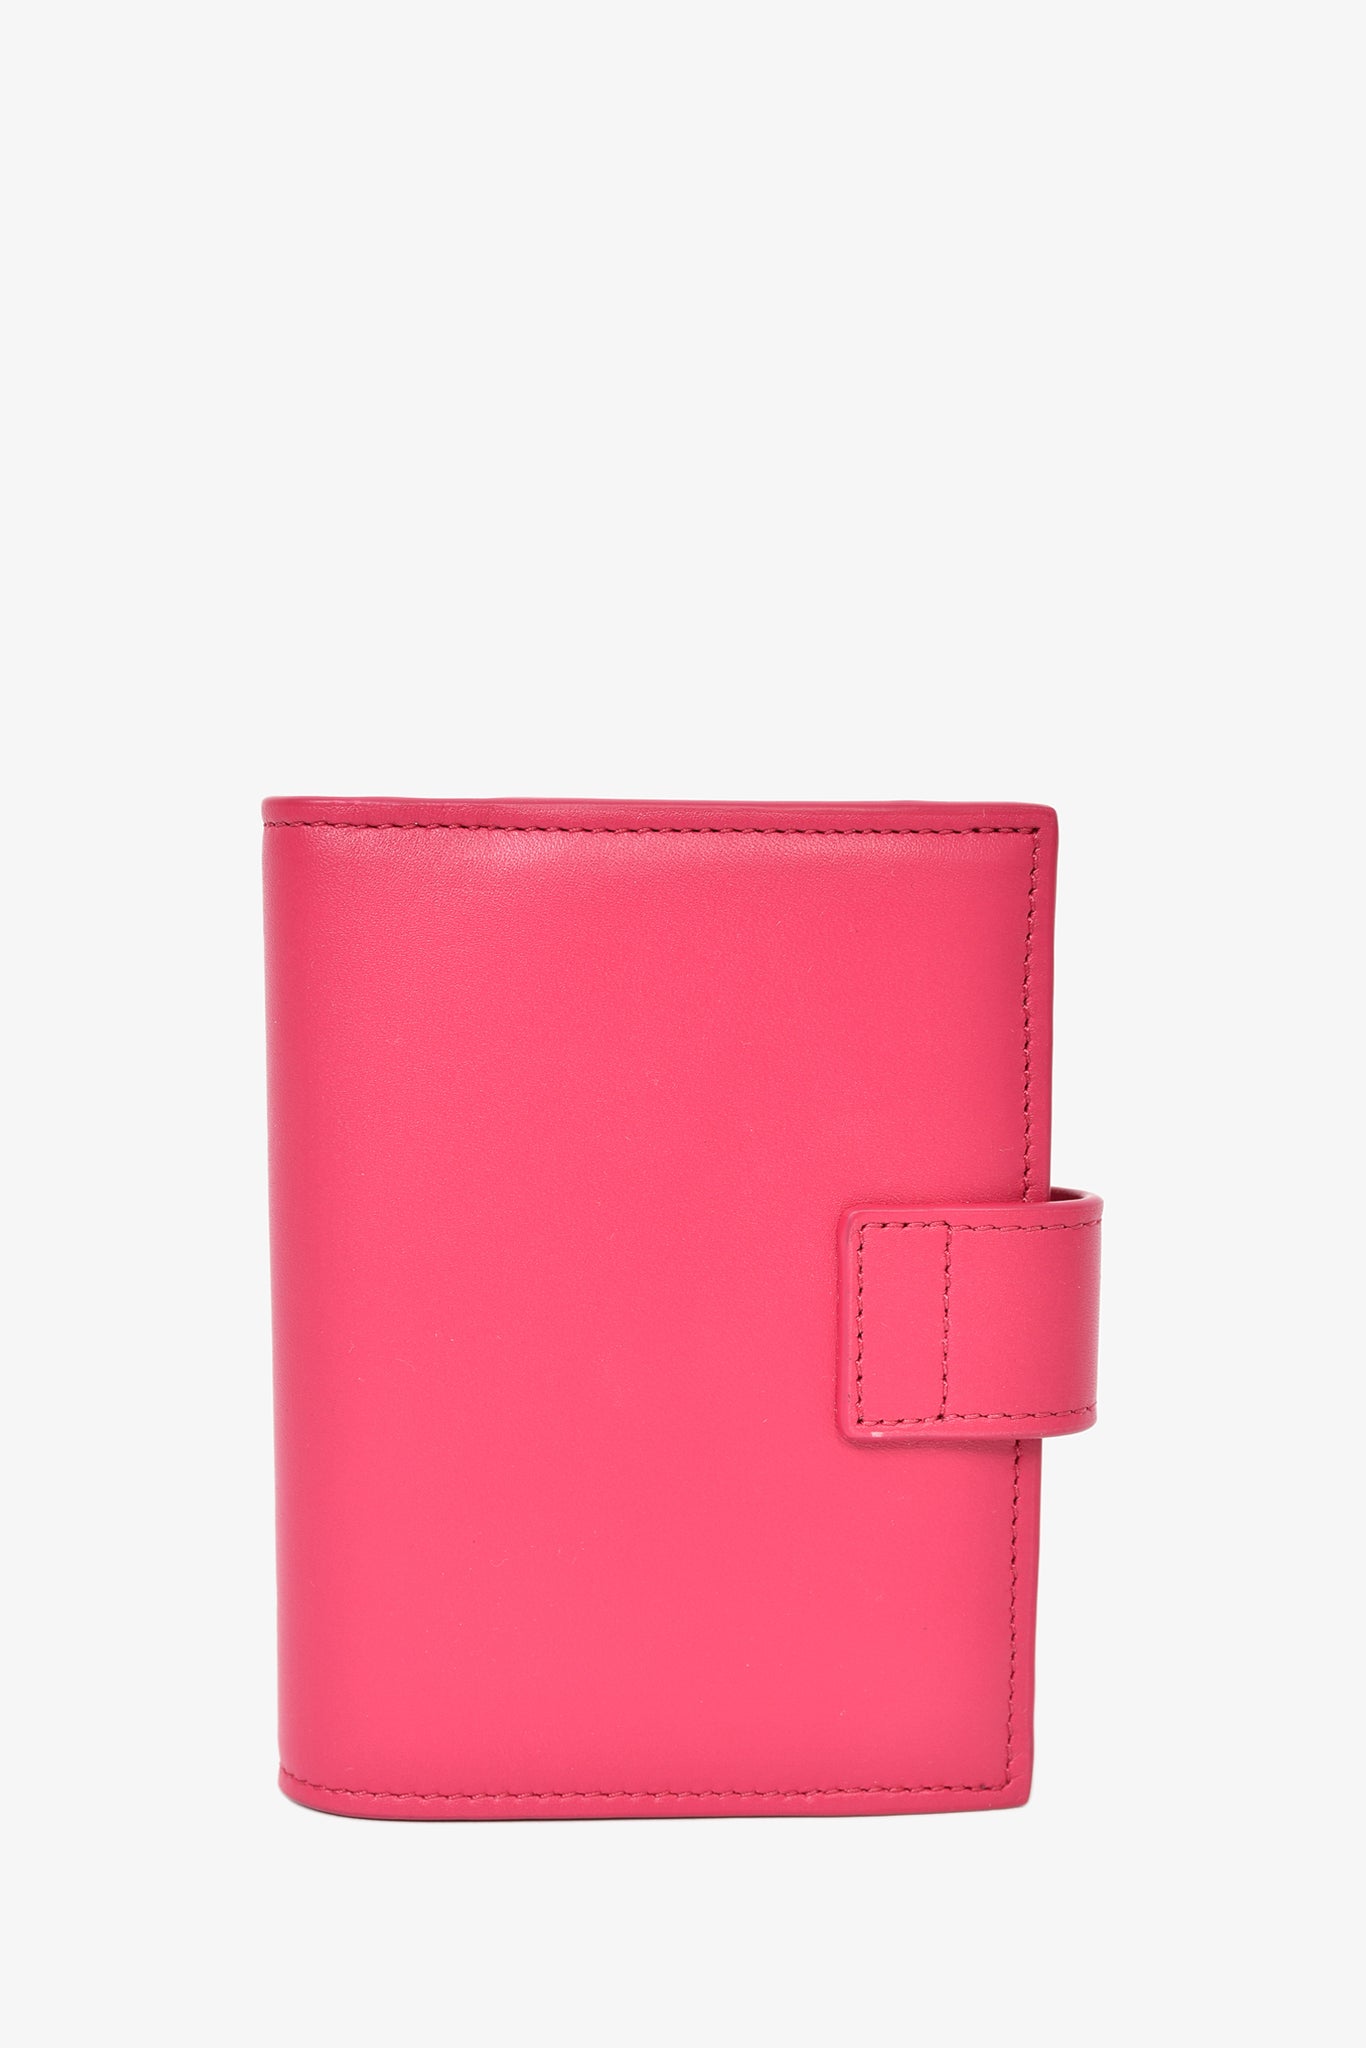 Loewe Magenta Leather Anagram Compact Wallet – Mine & Yours